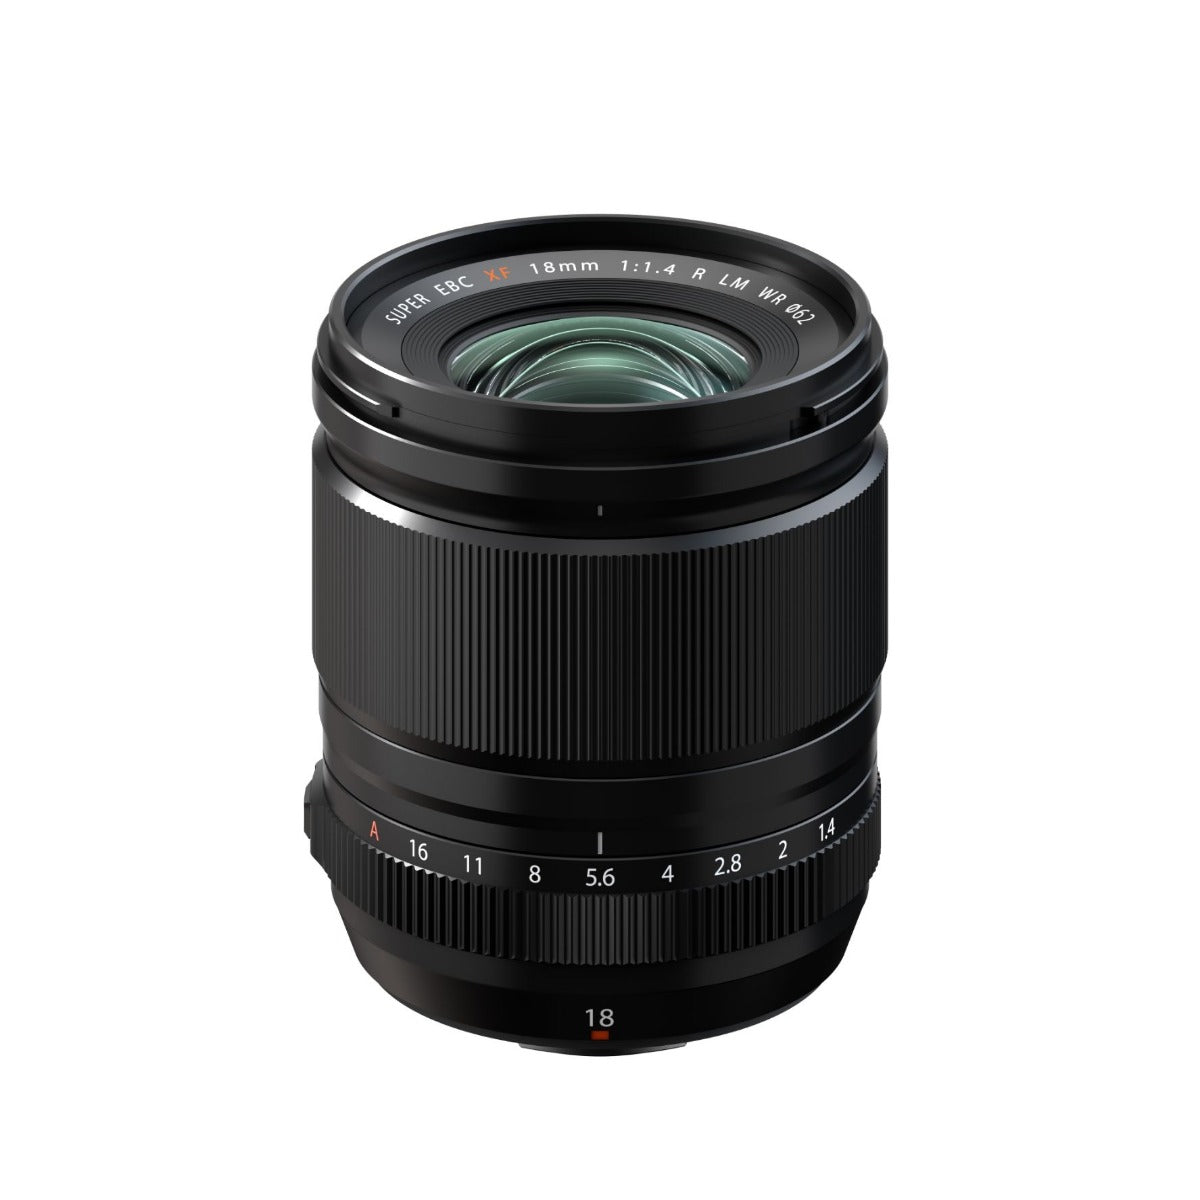 Product Image of Fujifilm XF 18mm F1.4 LM WR lens